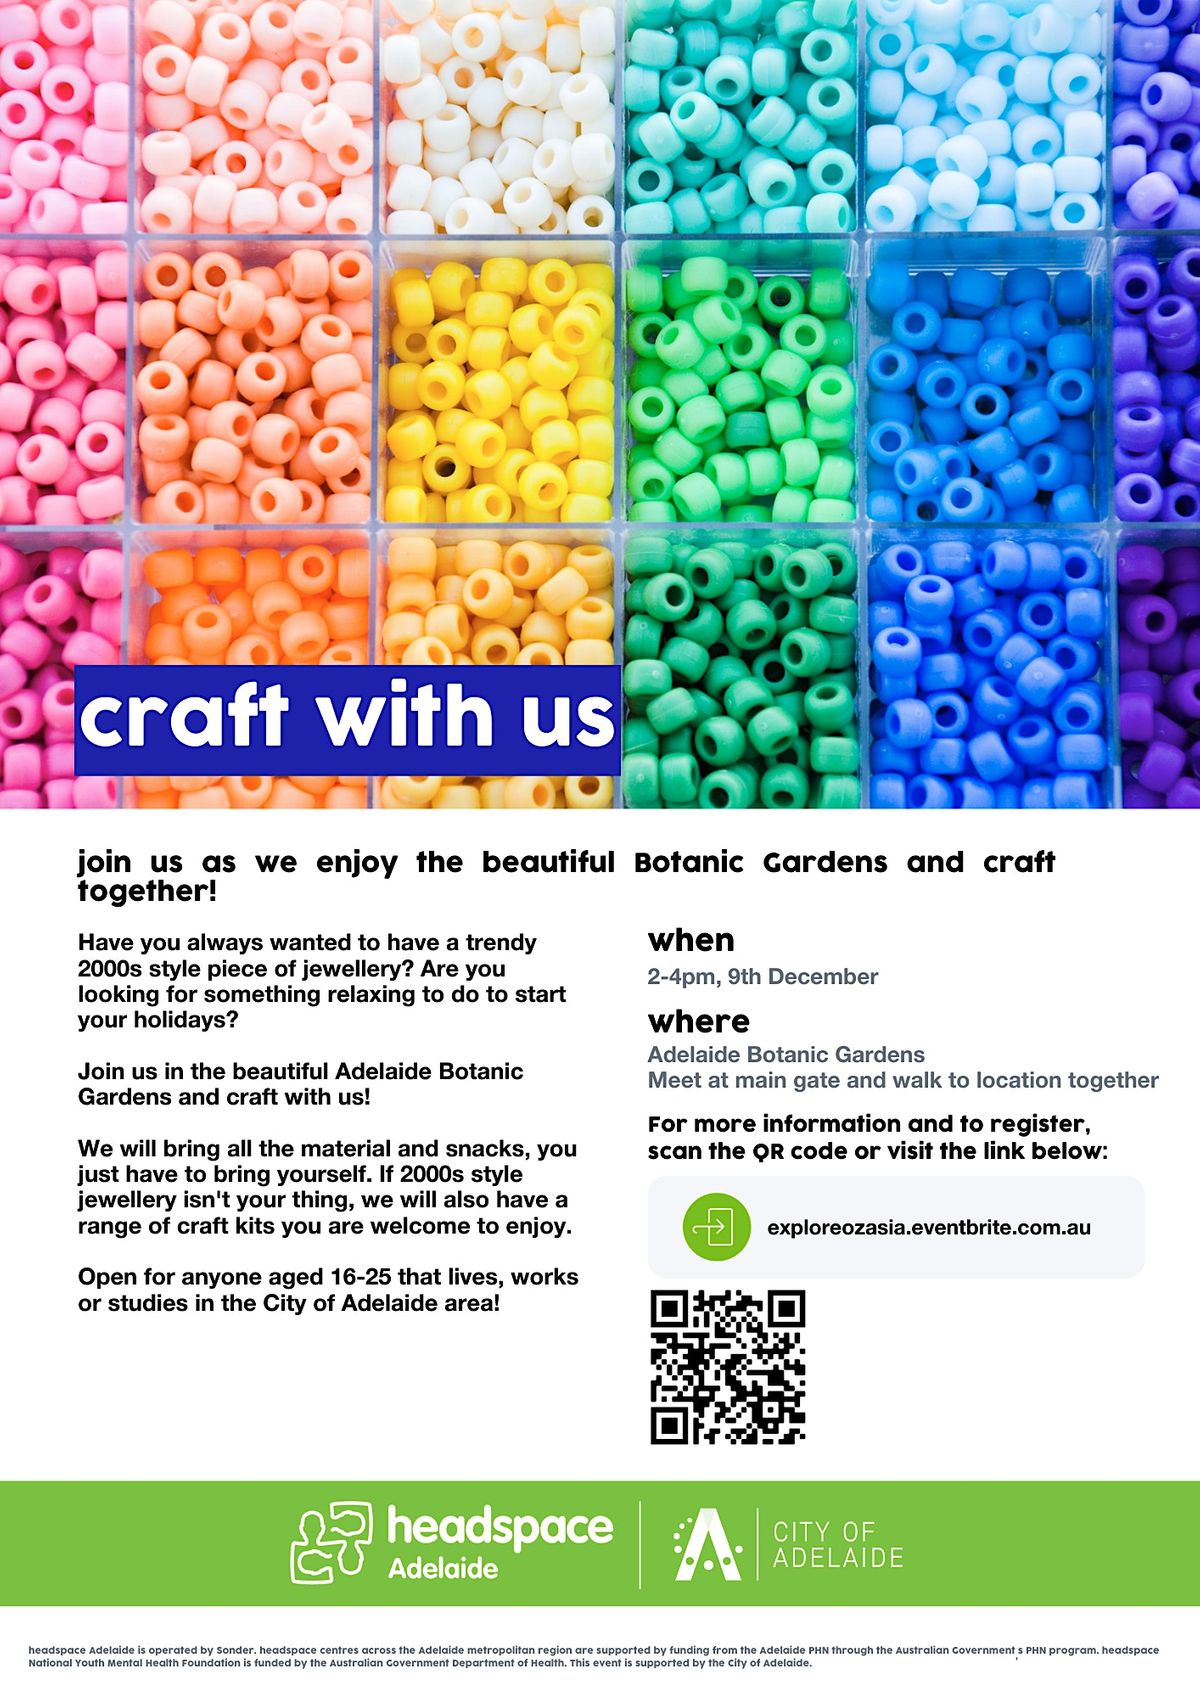 Craft with us